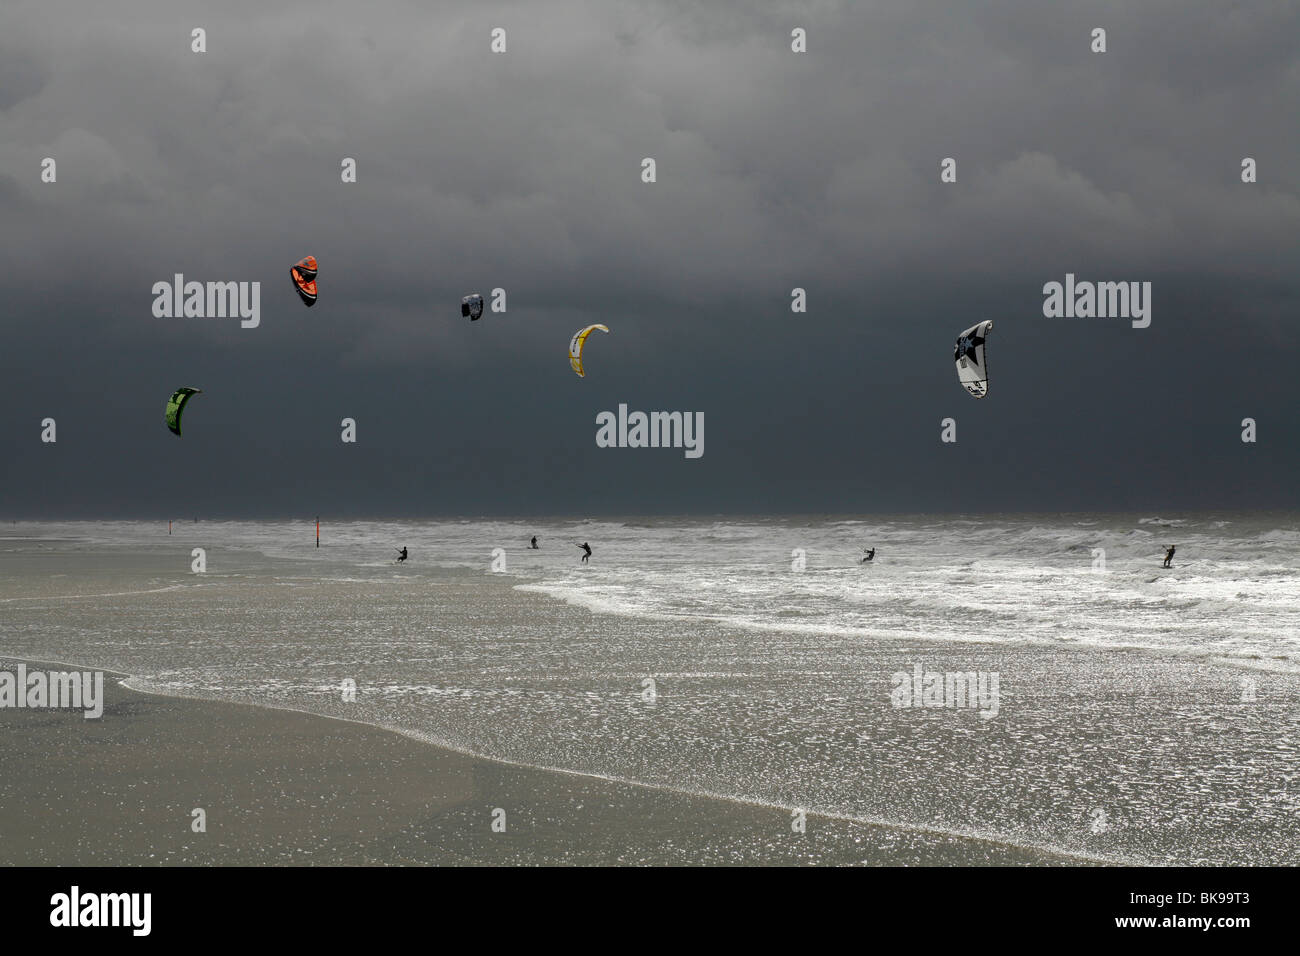 Kitesurfing during a storm on the North Sea, St. Peter Ording, Schleswig-Holstein, Germany, Europe Stock Photo